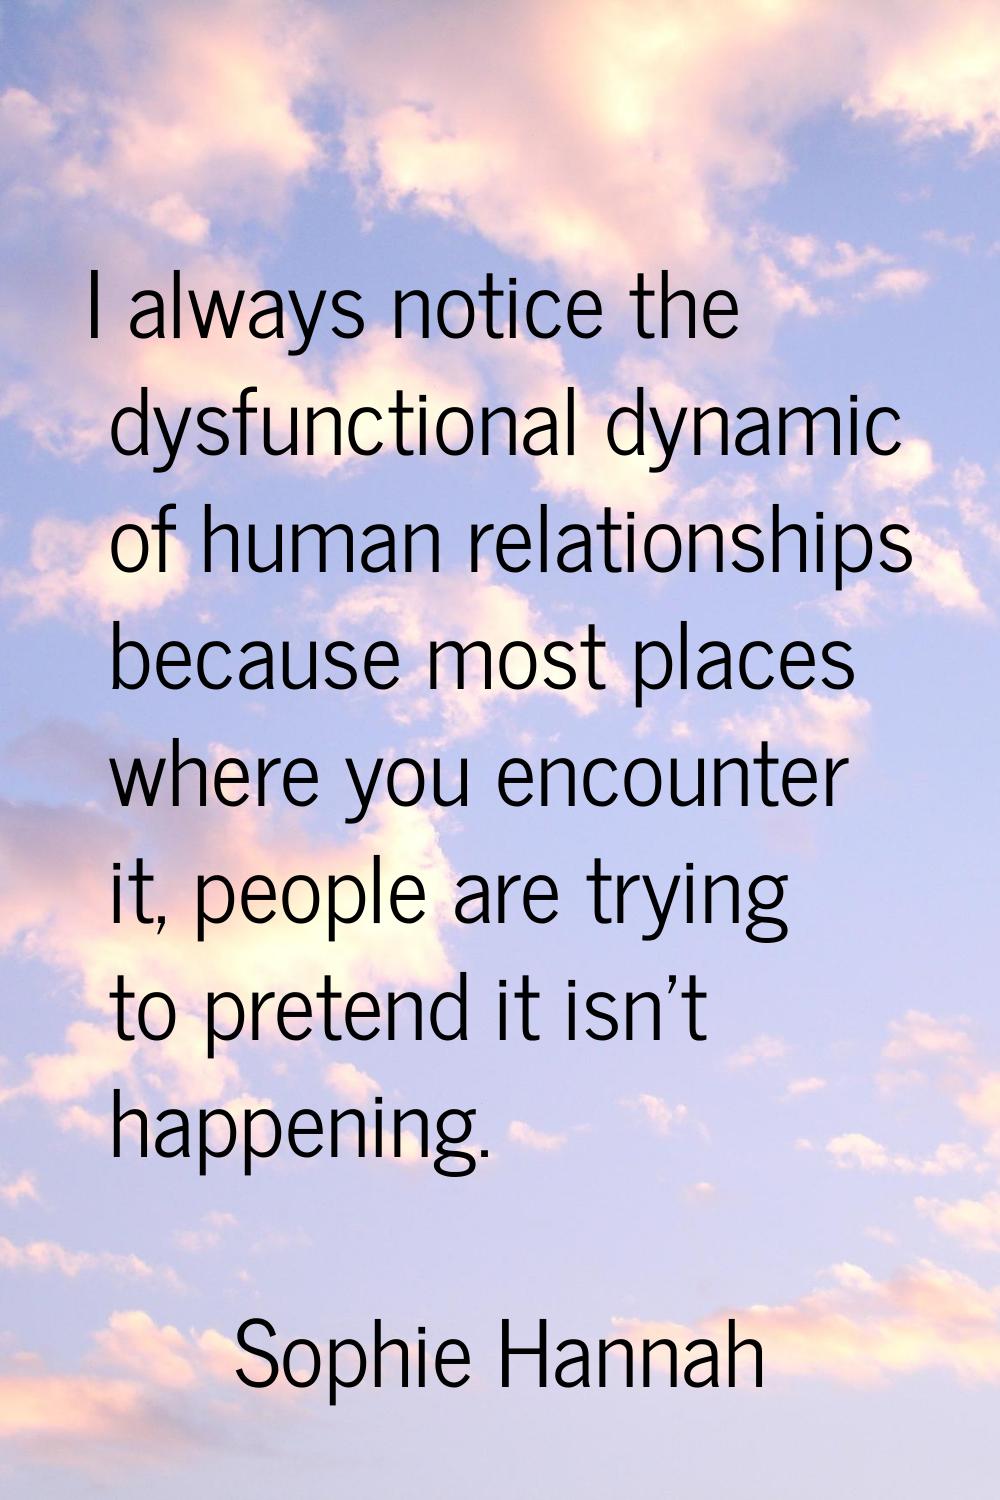 I always notice the dysfunctional dynamic of human relationships because most places where you enco